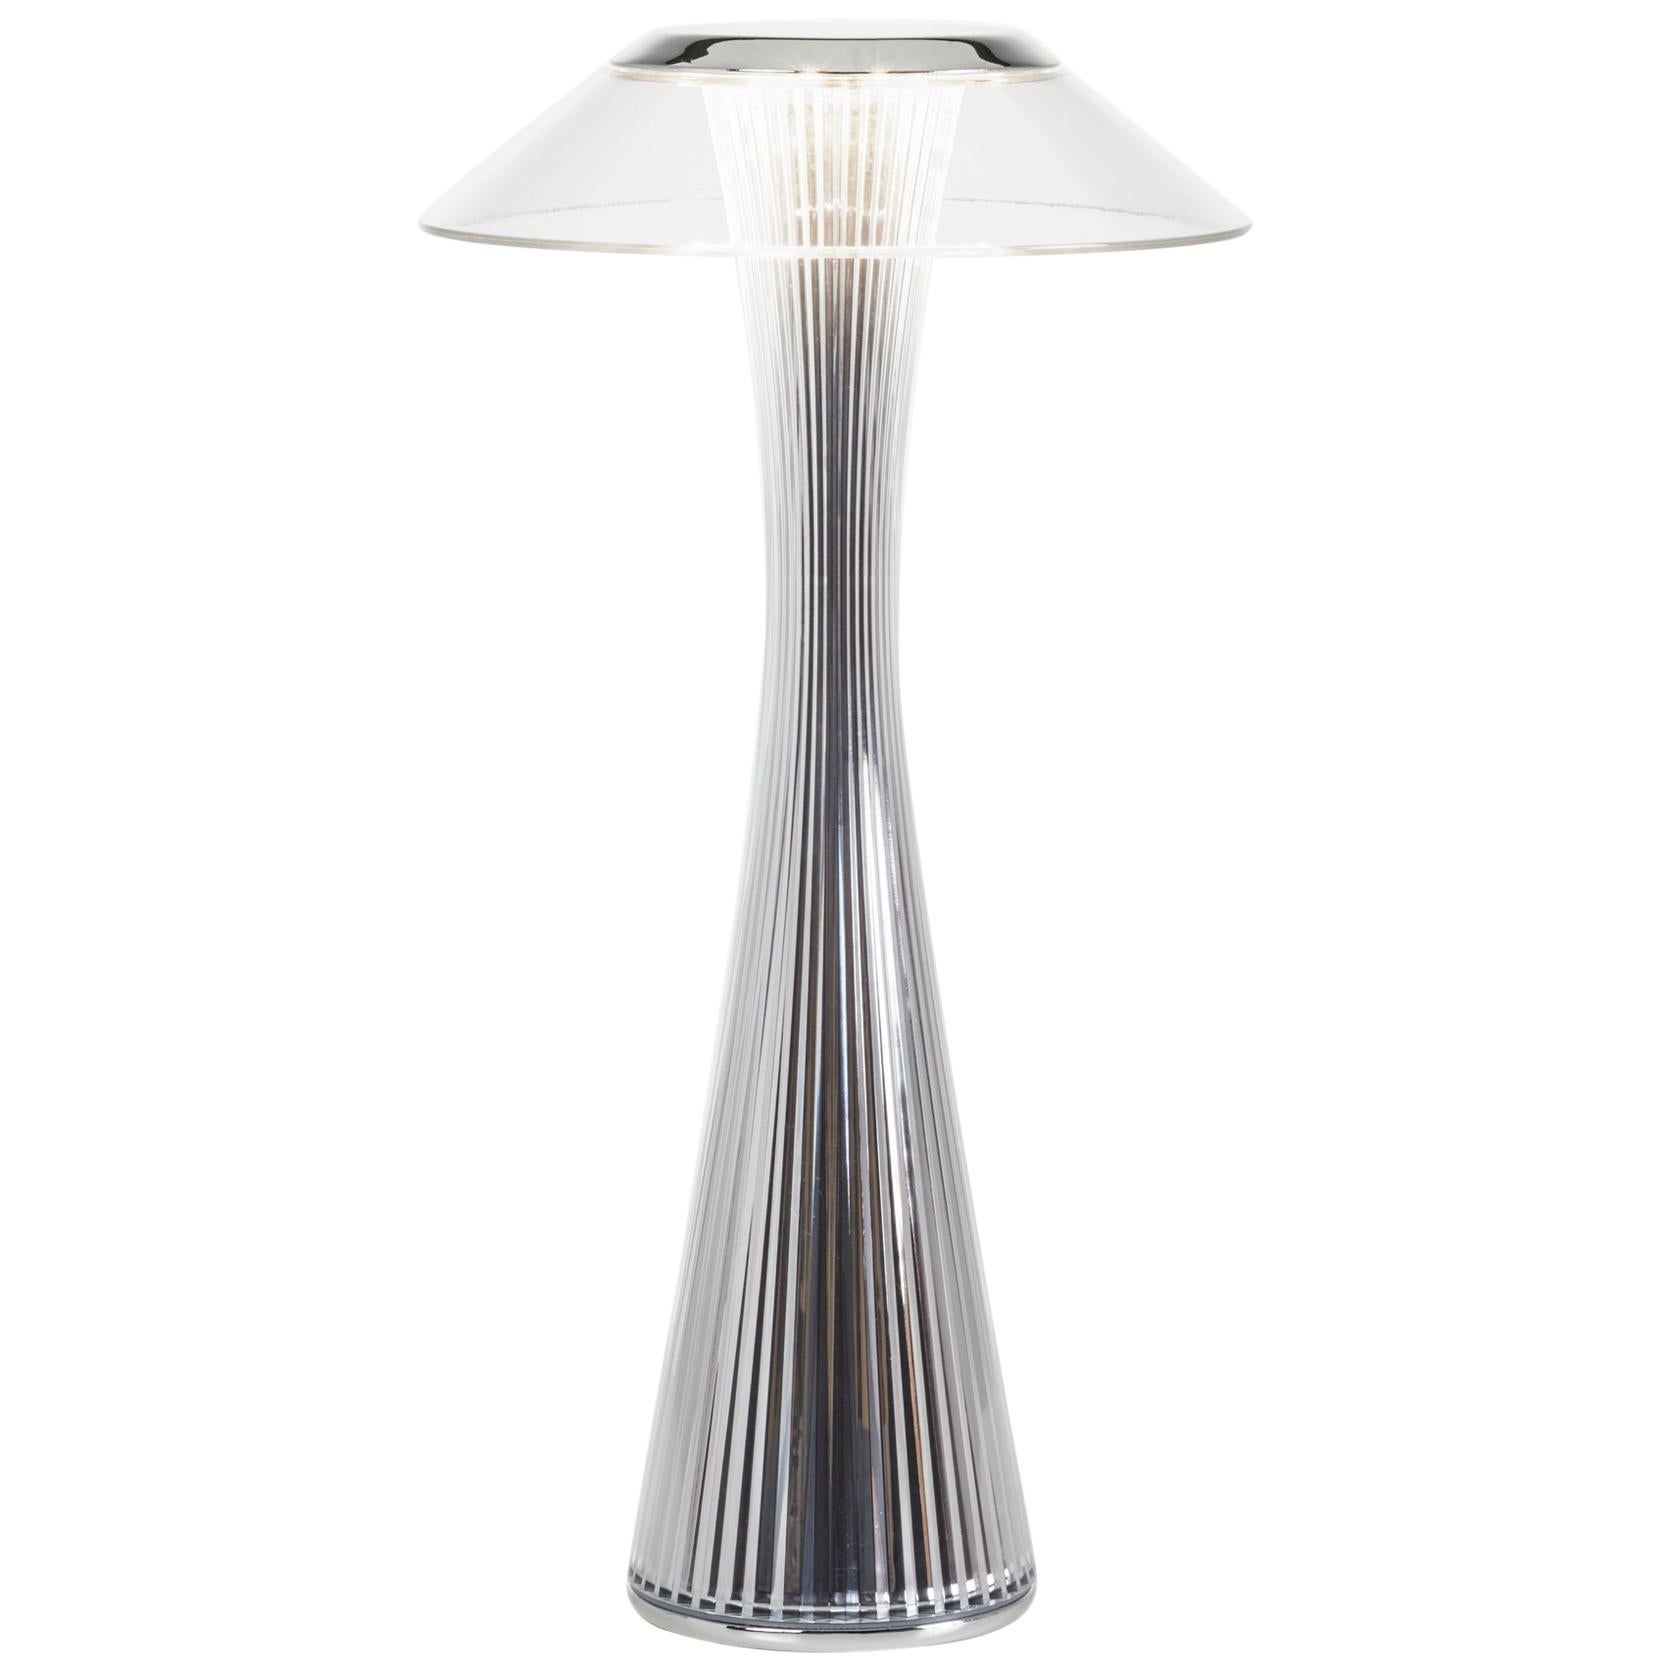 Kartell Space Lamp in Chrome by Adam Tihany